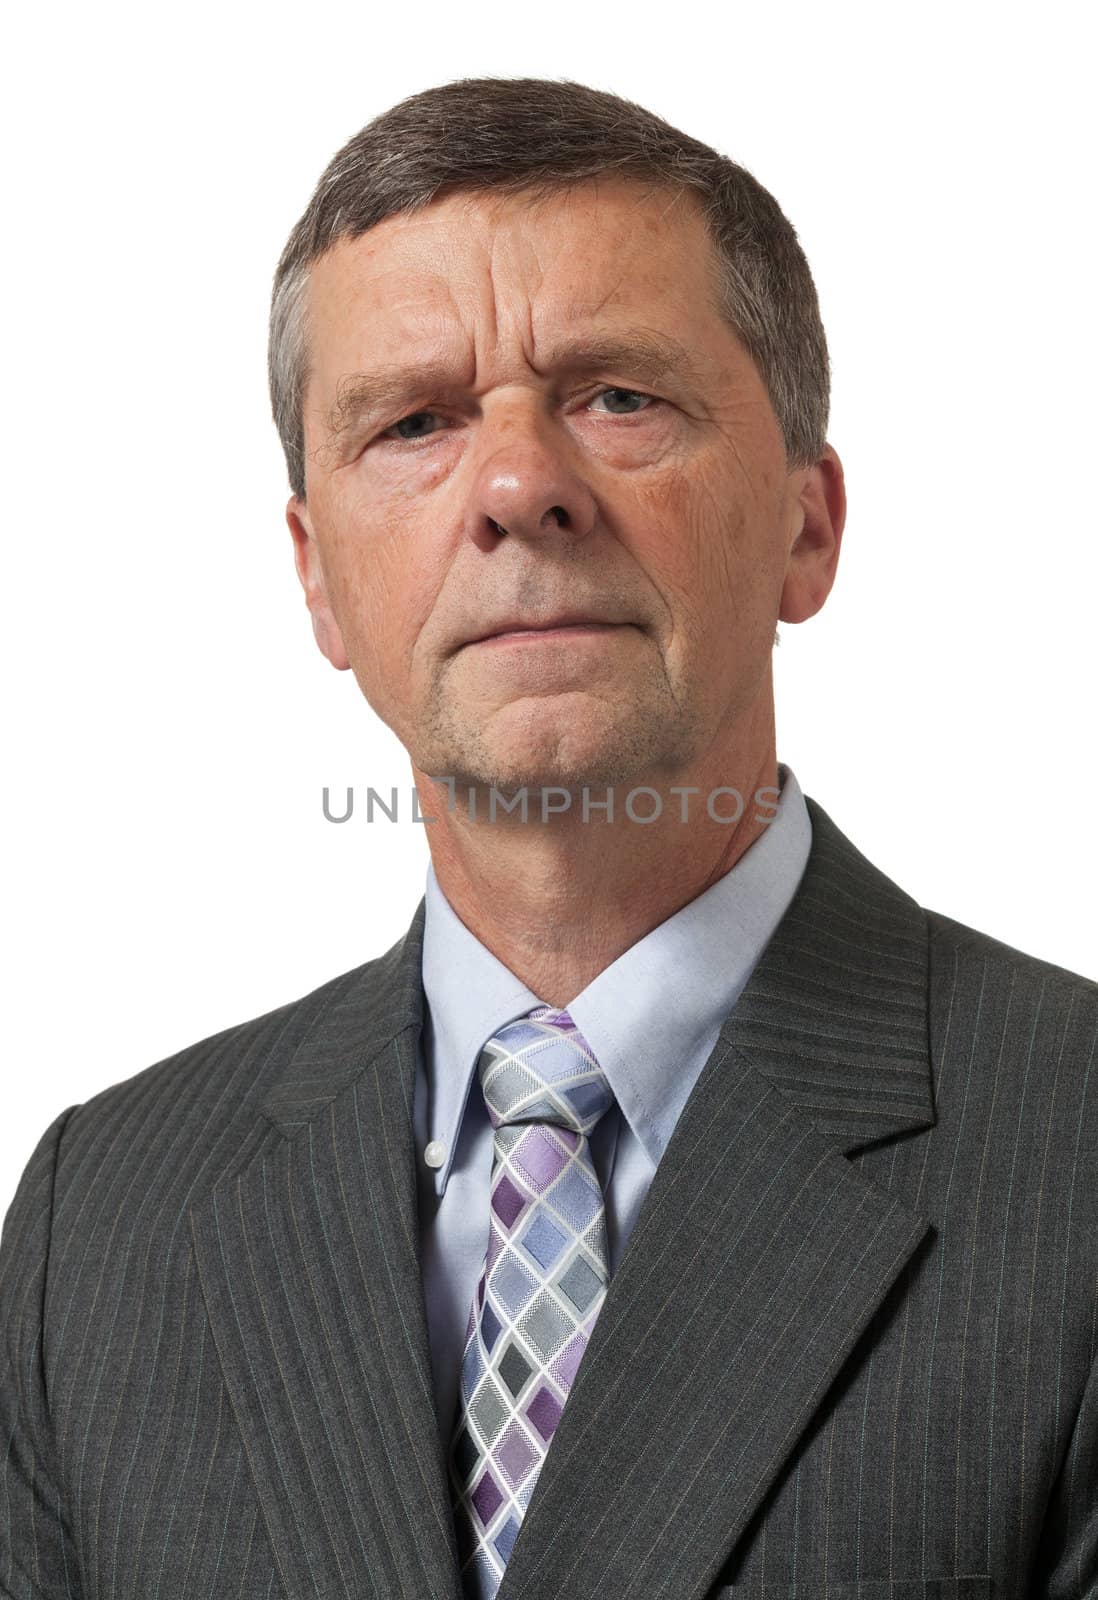 Retired executive looks pensively towards the camera and isolated against white